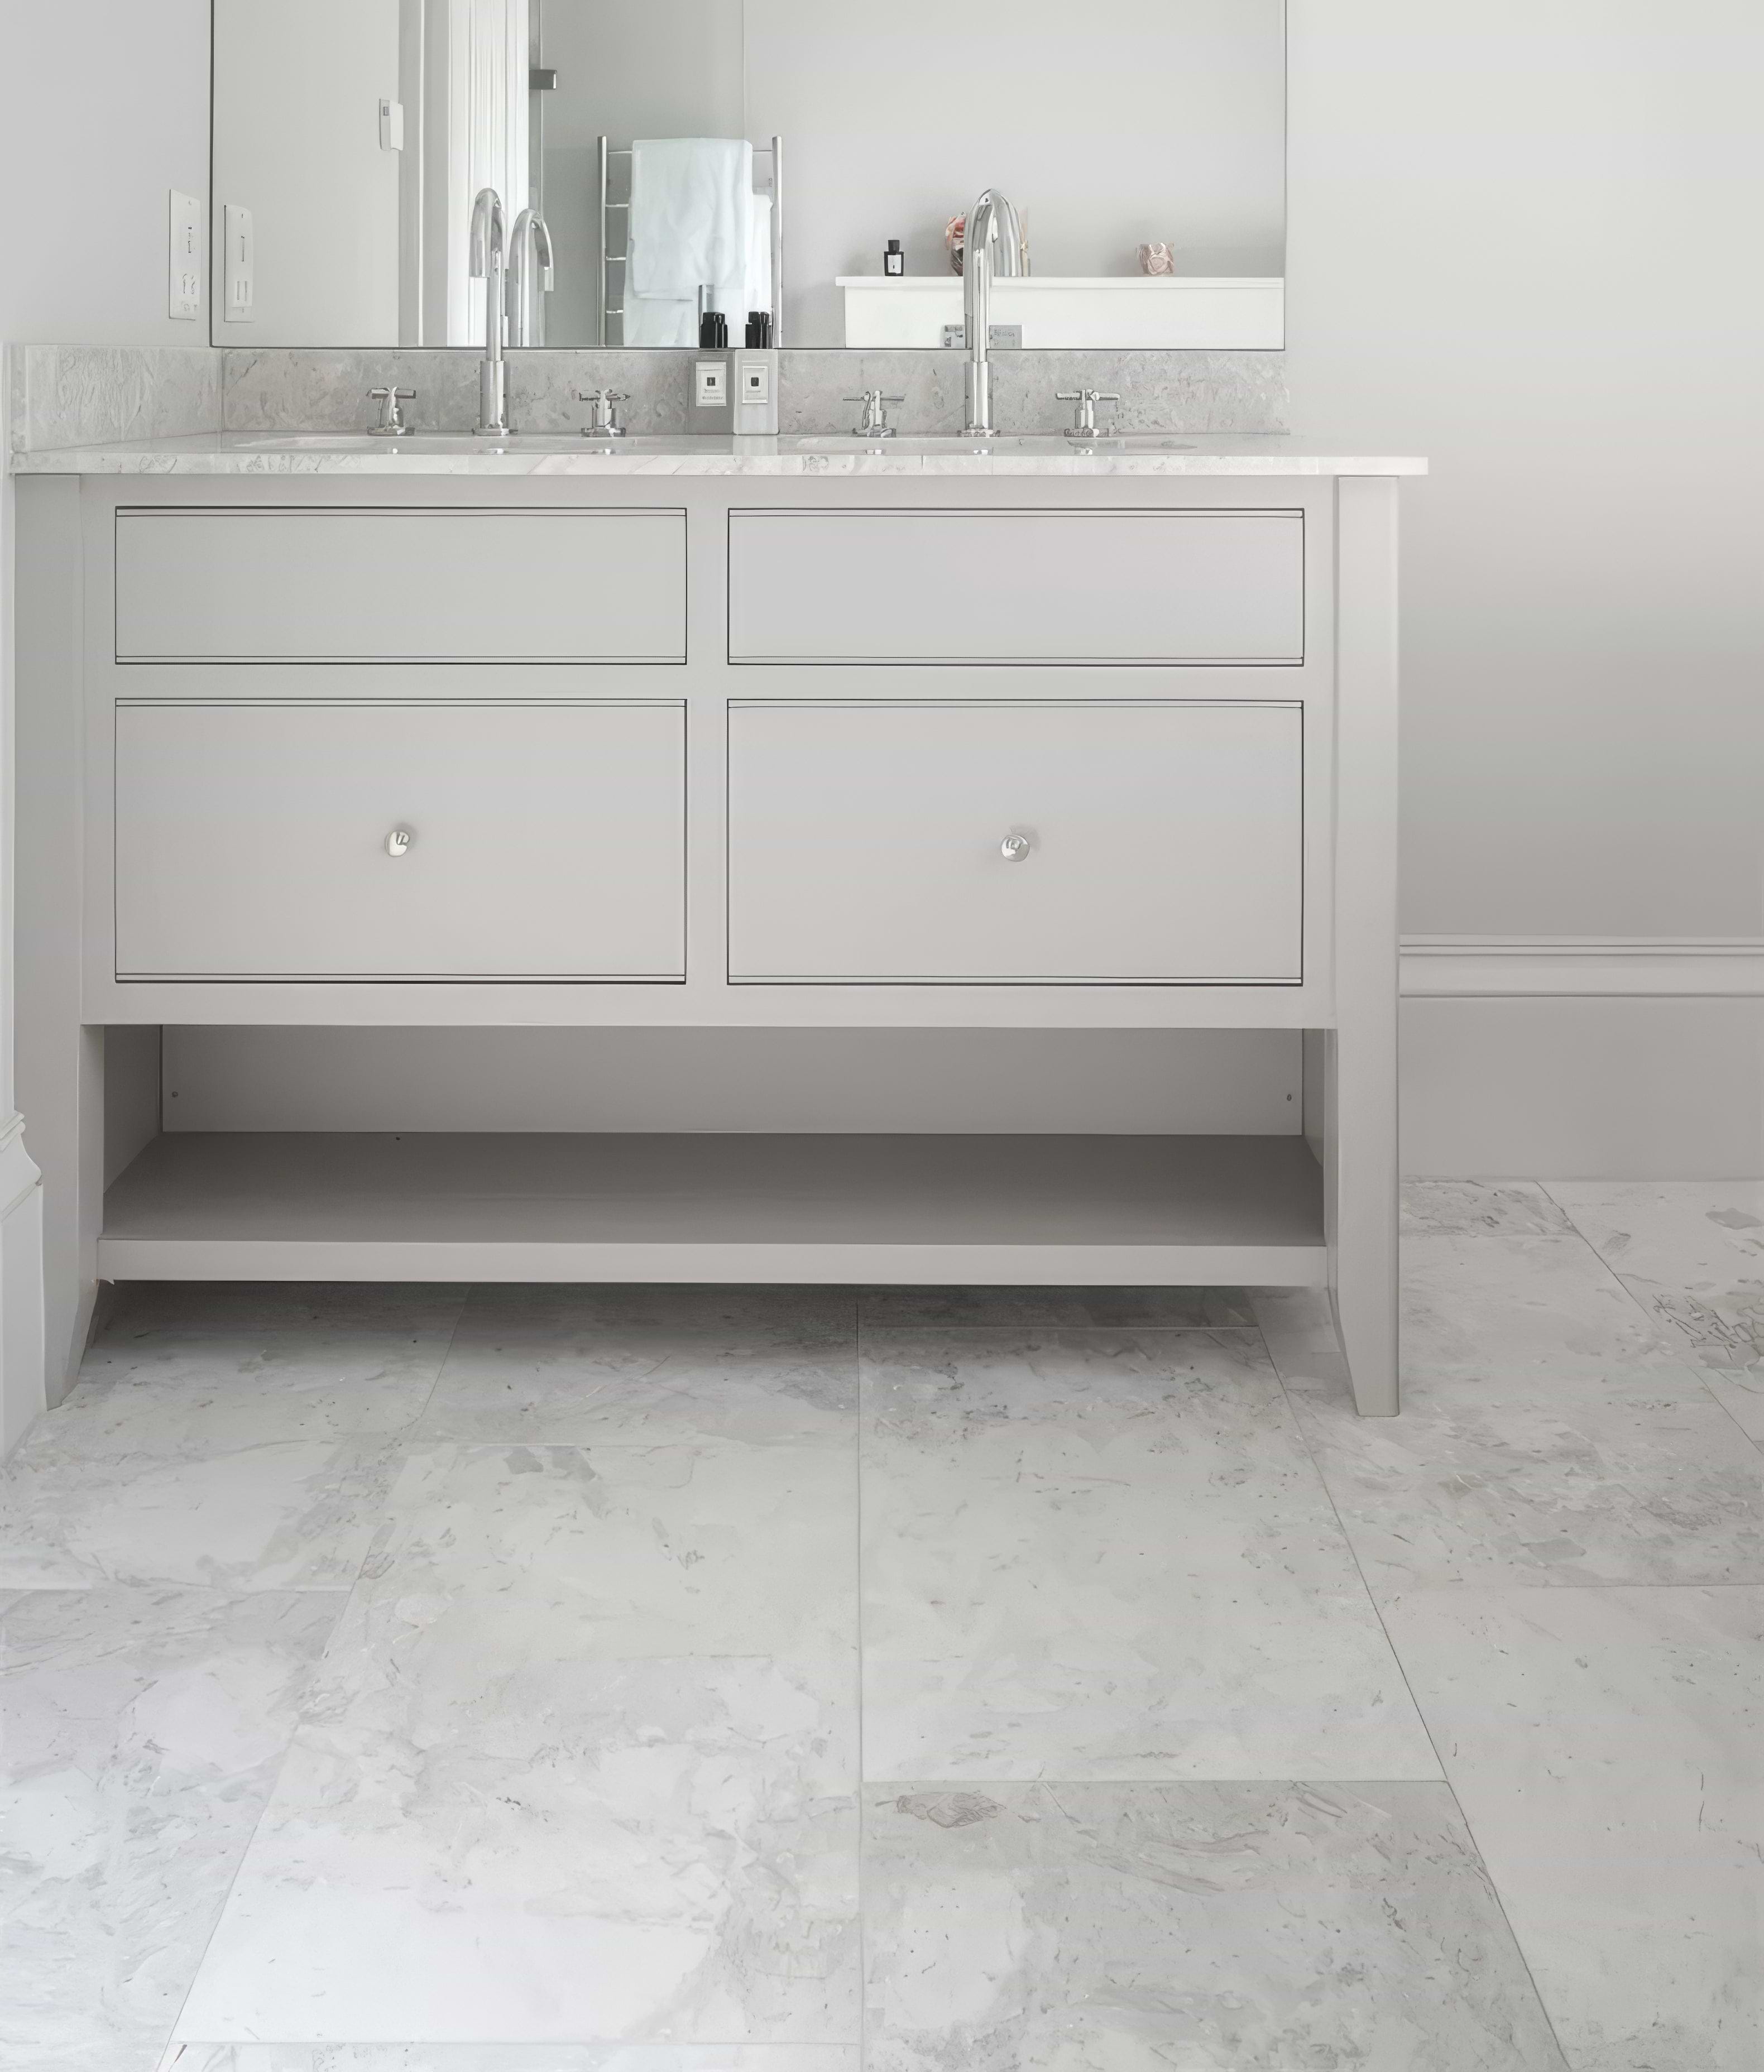 Nordic Marble Honed Finish - Hyperion Tiles